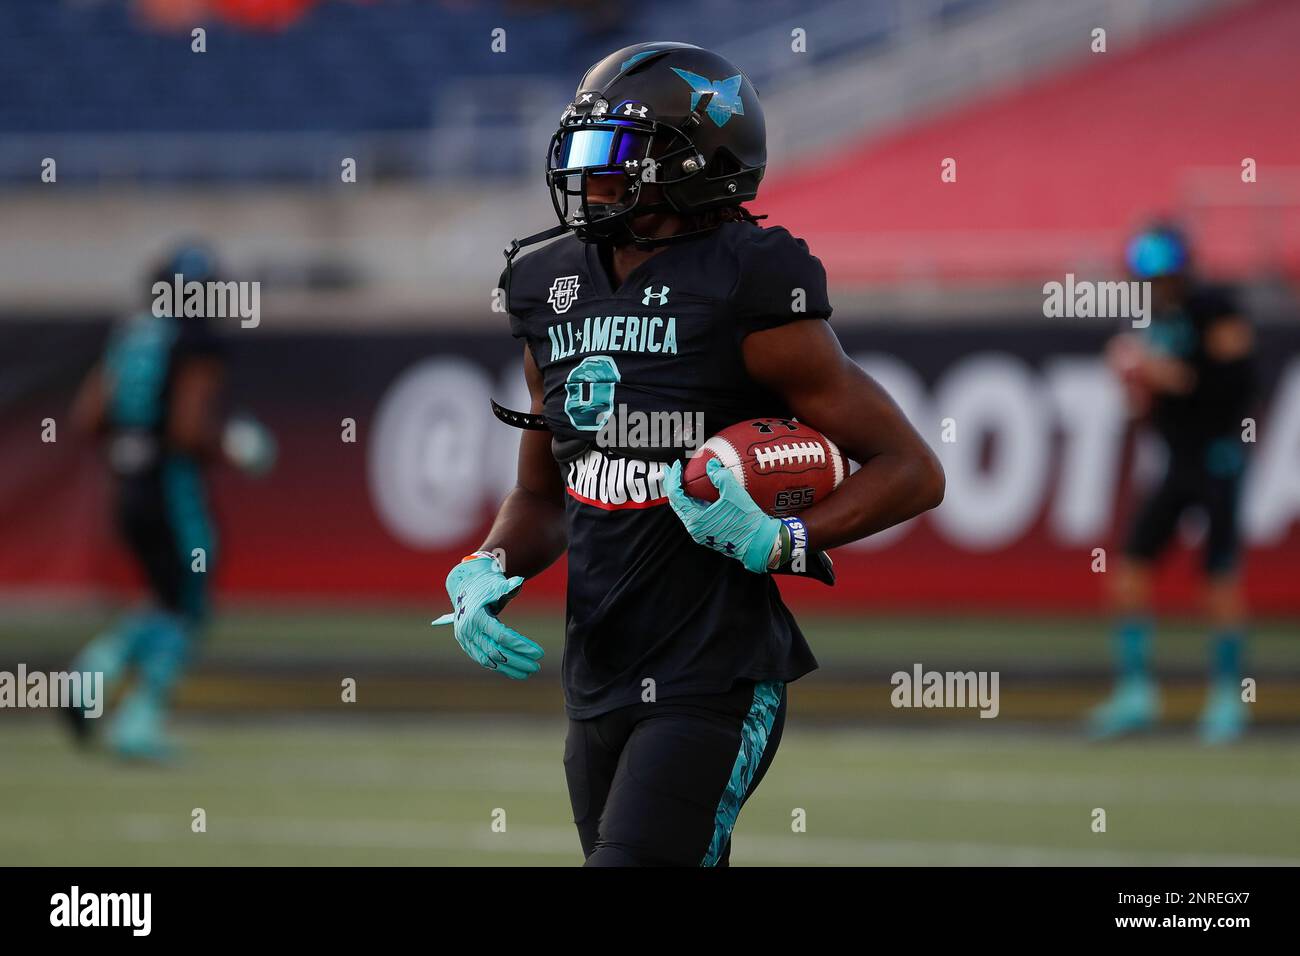 ORLANDO, FL - JANUARY 02: Team Pressure wide receiver Jaquavion Fraziars  (6) during the 2020 Under Armour All-America Game on January 02, 2020 at  Camping World Stadium in Orlando, FL. (Photo by